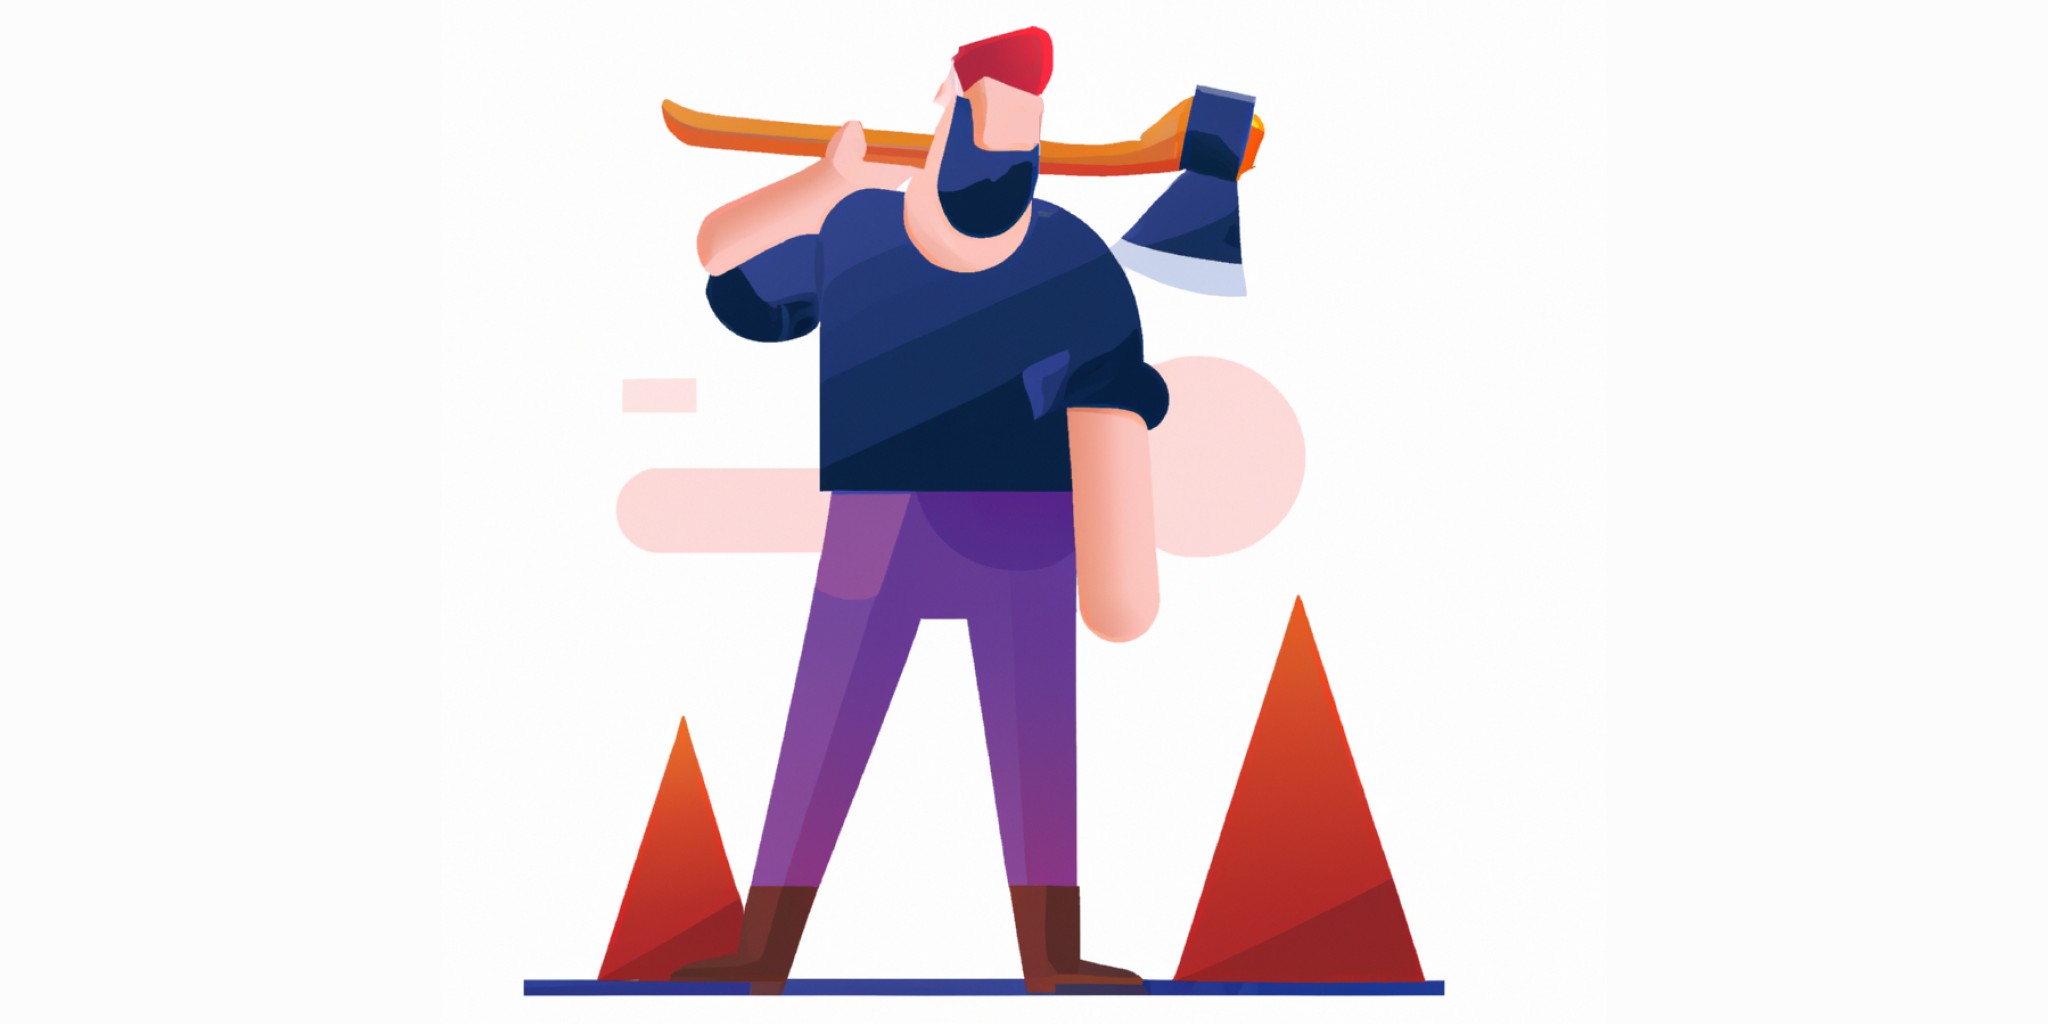 lumberjack with an ax in flat illustration style with gradients and white background